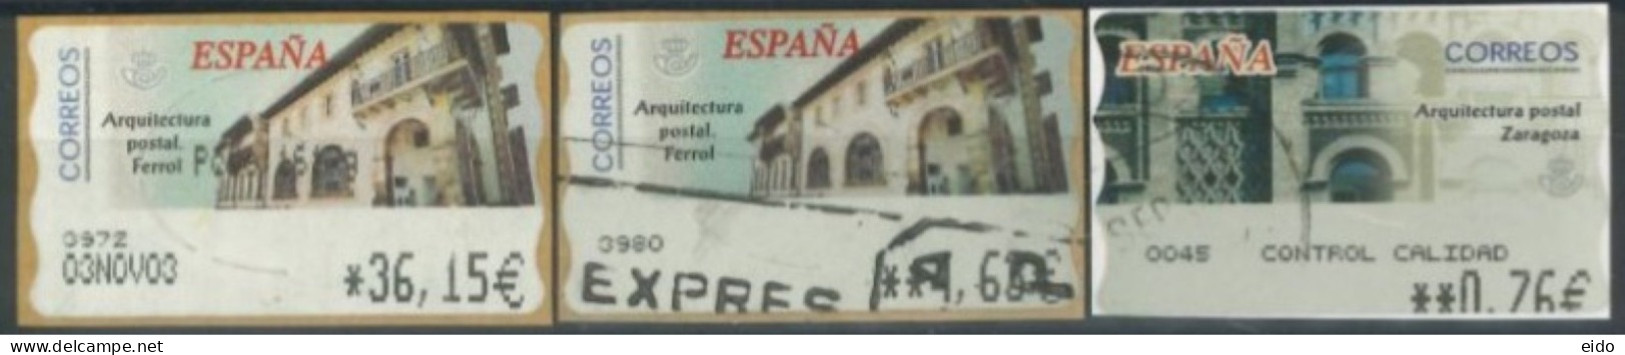 SPAIN - 2003 - POSTAL ARCHITECTURE FERROL & ZARAGOZA STAMPS LABELS SET OF 3 OF DIFFERENT VALUES, USED . - Oblitérés